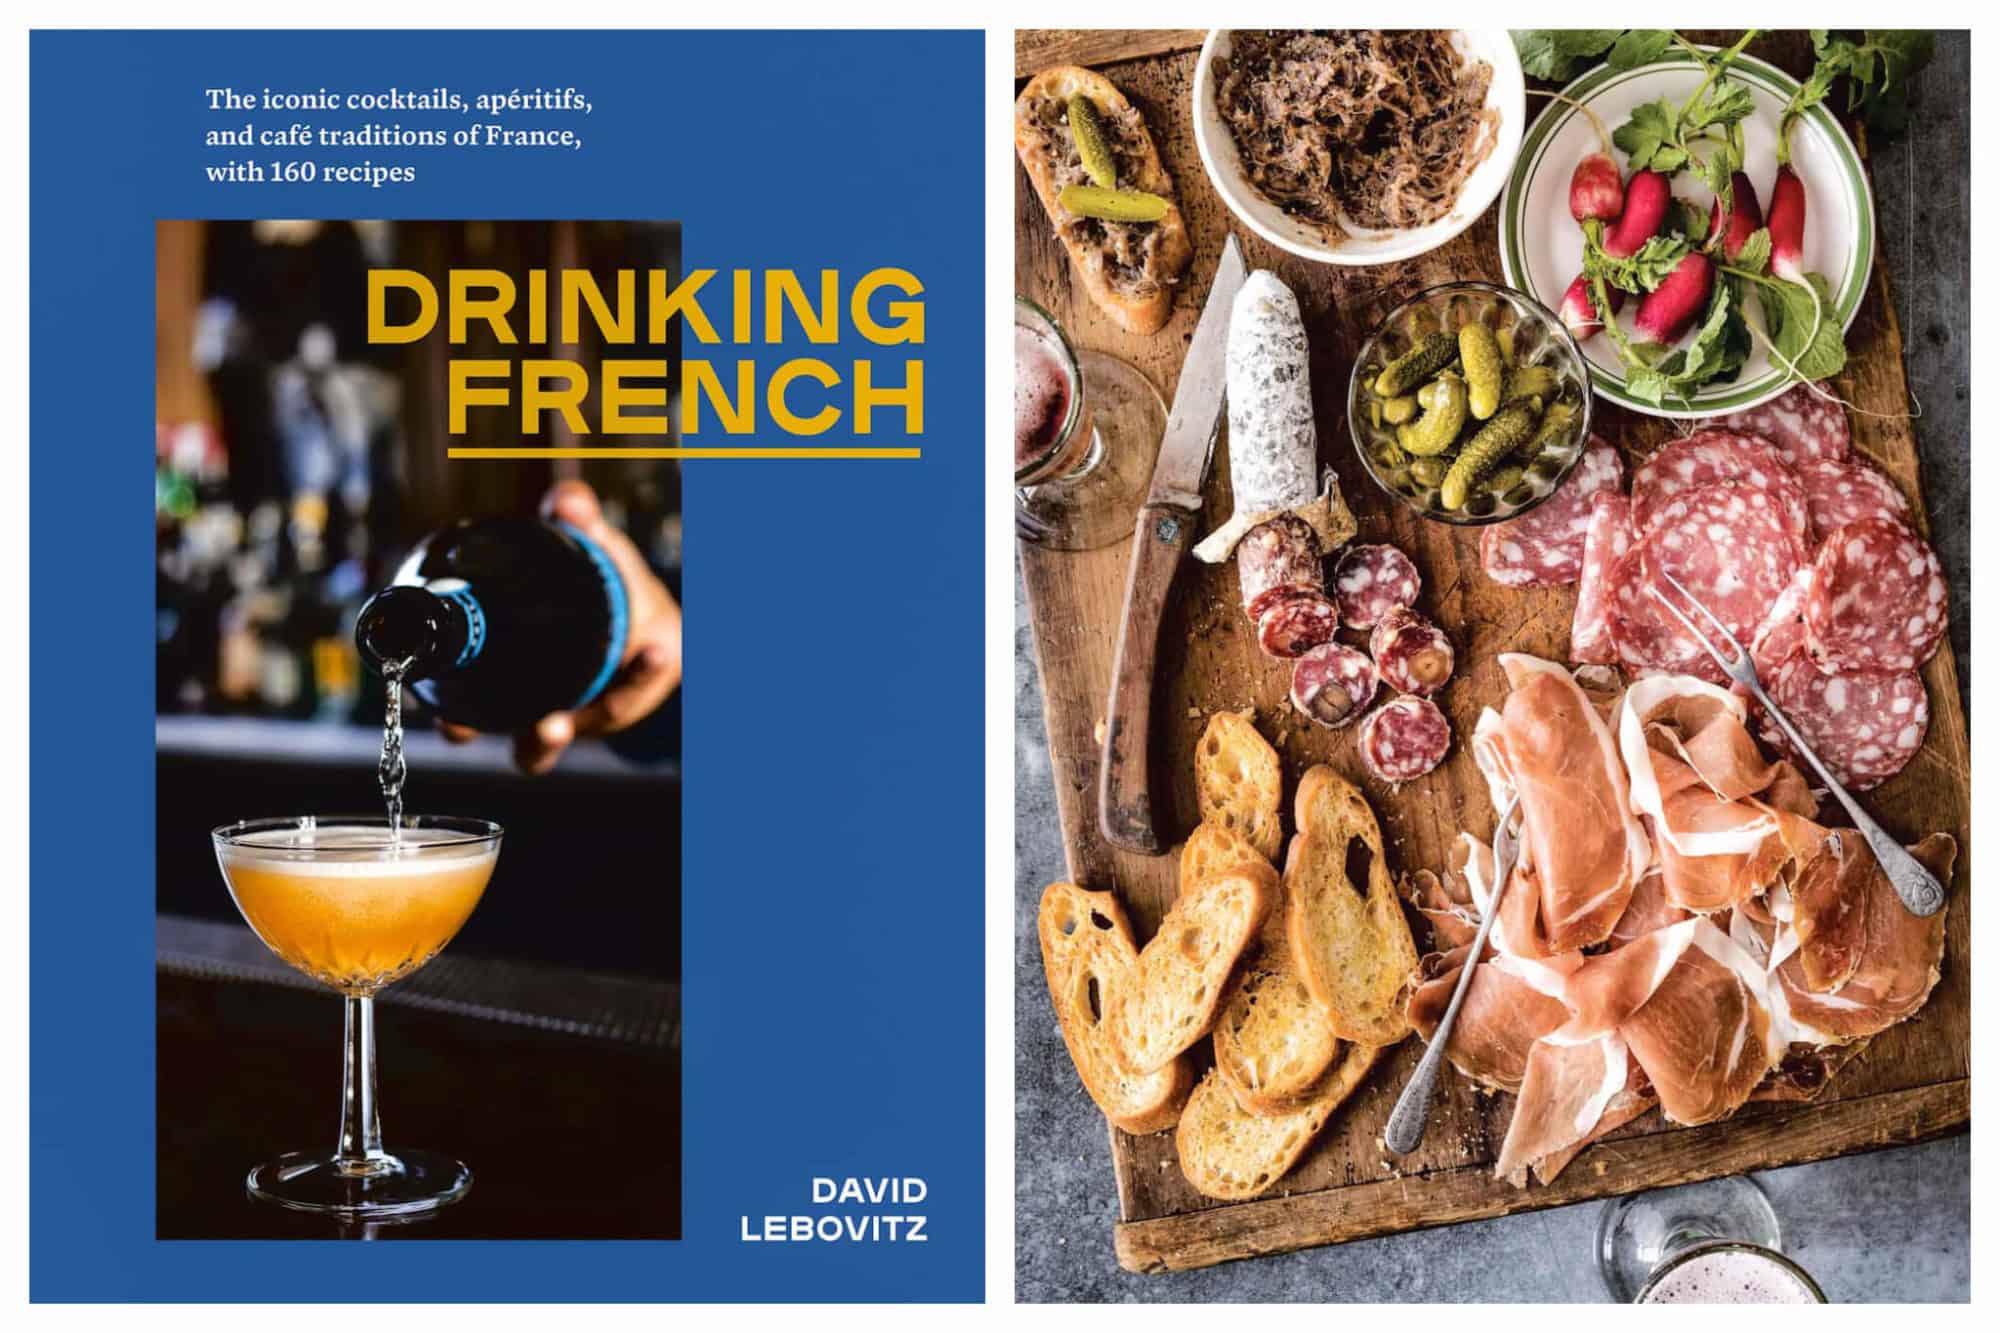 Left: A bartender pours orange-colored alcohol into a cocktail glass with a blue background behind the photo. The title of the book, Drinking French, crosses over the photo and background.
Right: A bright overlay of a charcuterie board that includes meats, slices of baguette, pickles, tapenade and radishes.